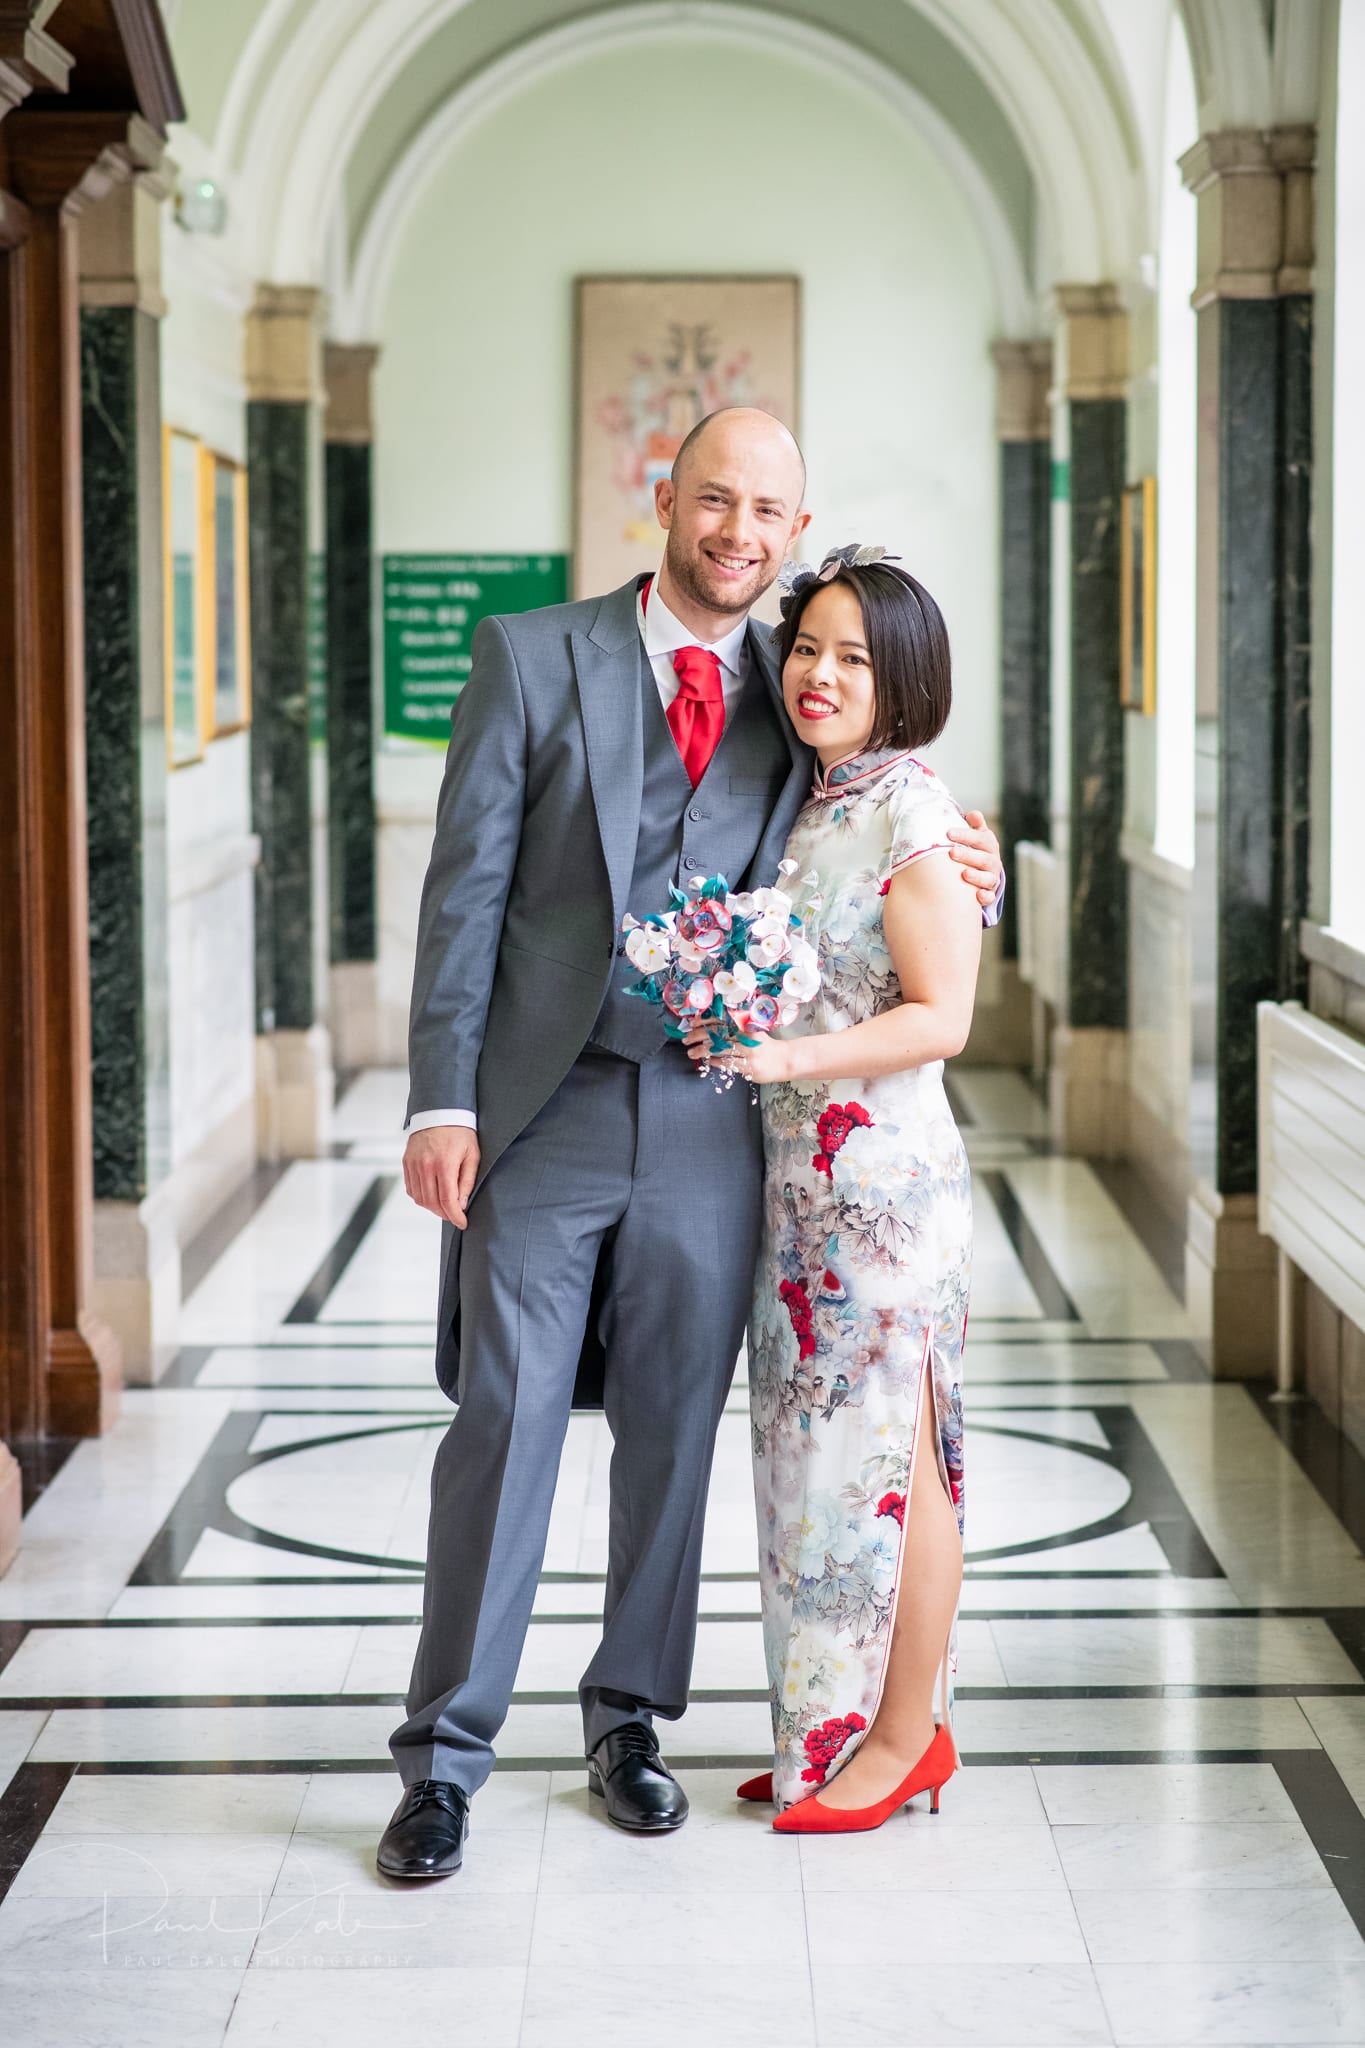 wedding couple looking happy in a corridor bathed in light